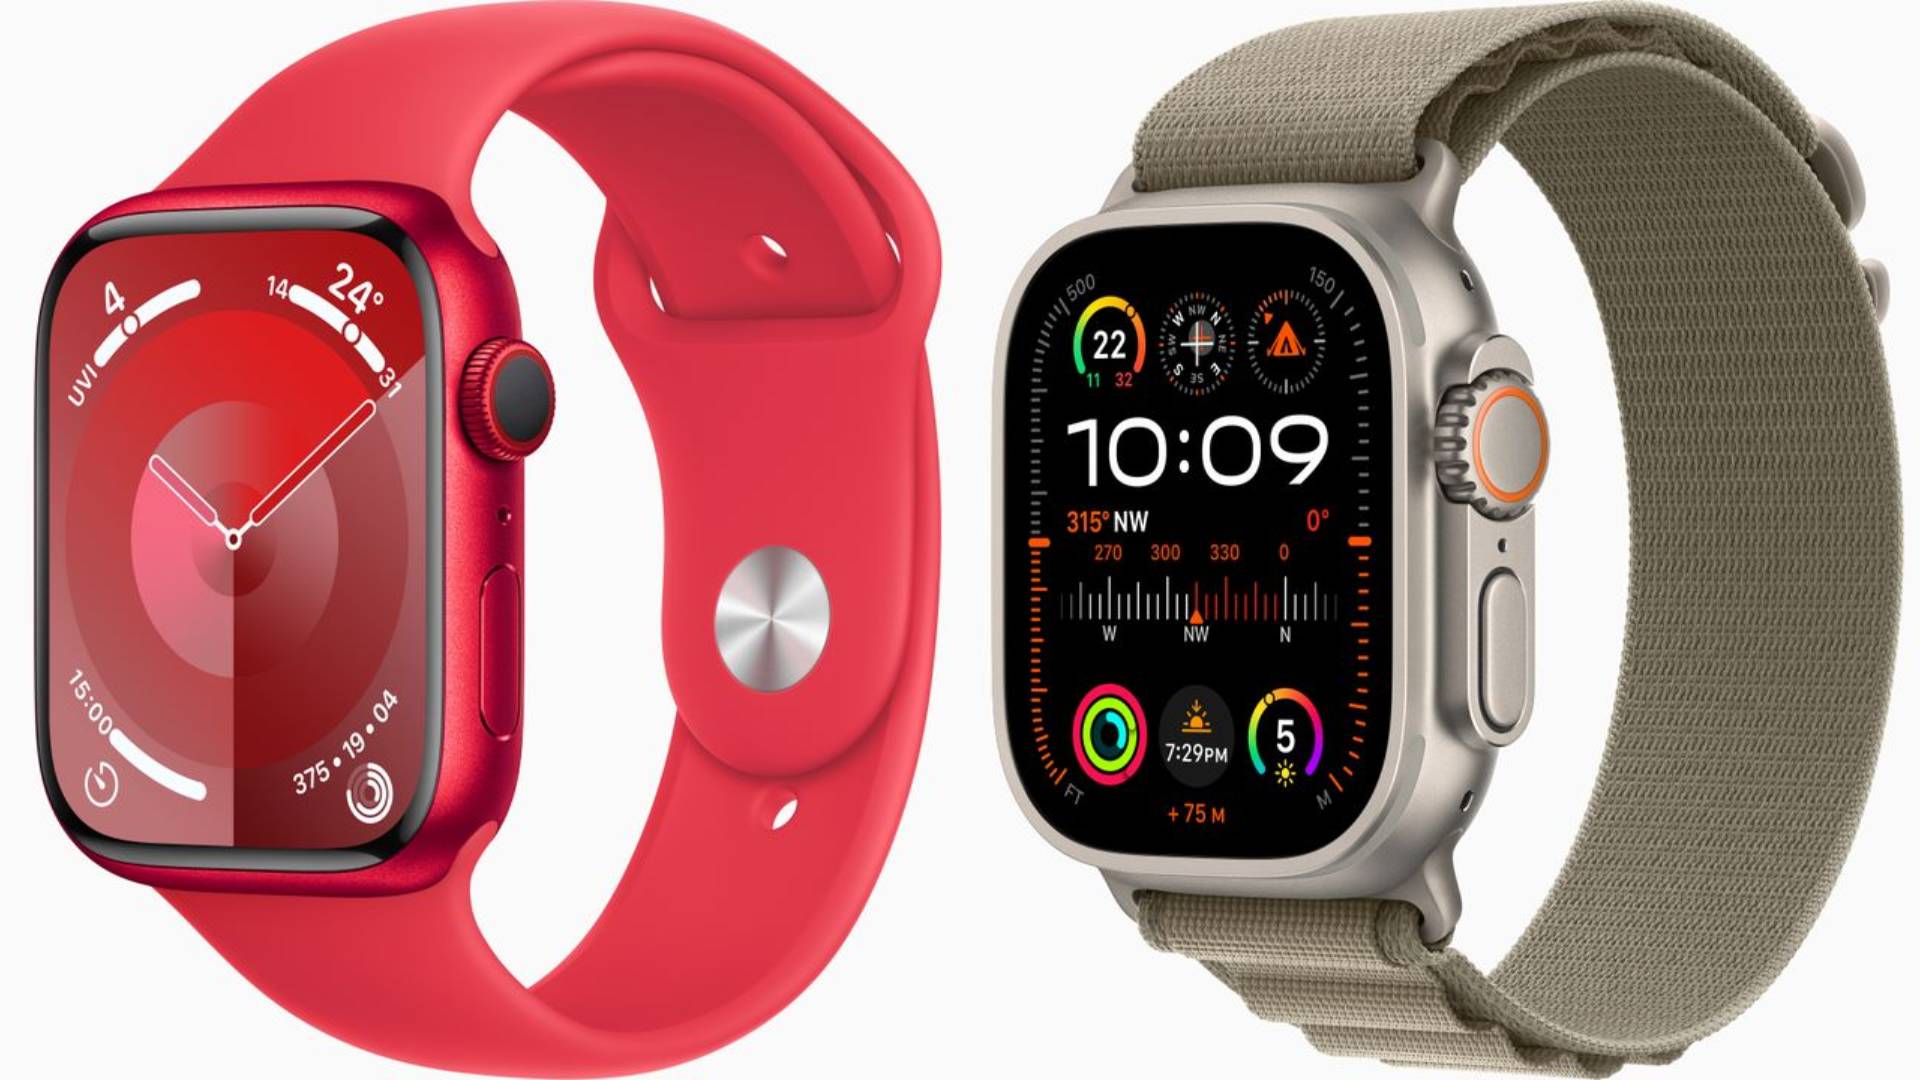 Apple Watch Ban: Temporary Relief for Apple as US Court Halts Sales Ban